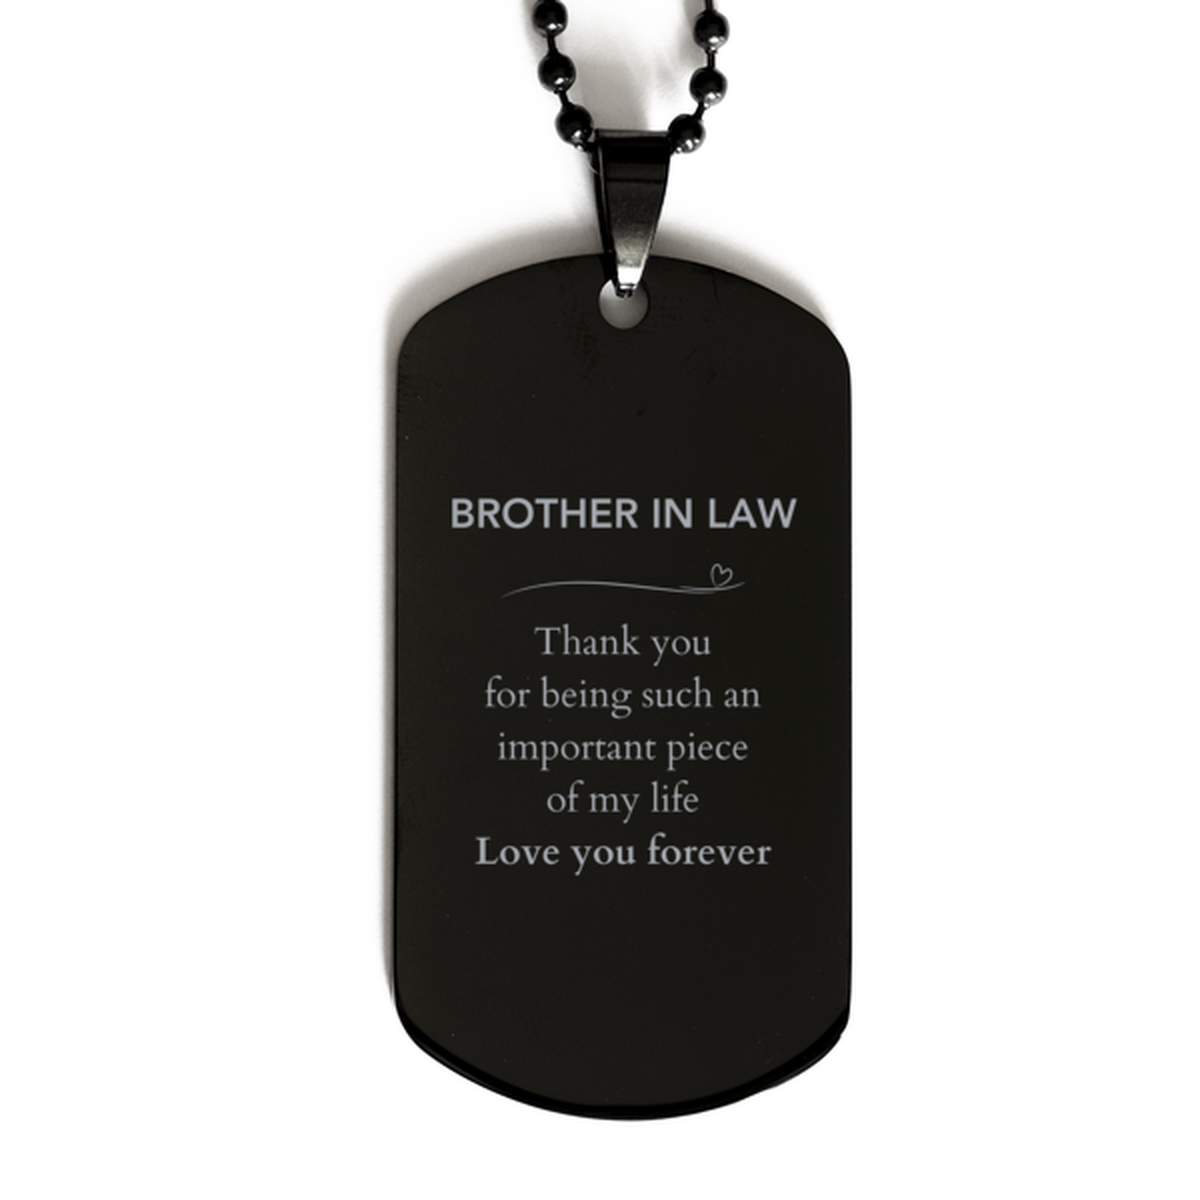 Appropriate Brother In Law Black Dog Tag Epic Birthday Gifts for Brother In Law Thank you for being such an important piece of my life Brother In Law Christmas Mothers Fathers Day